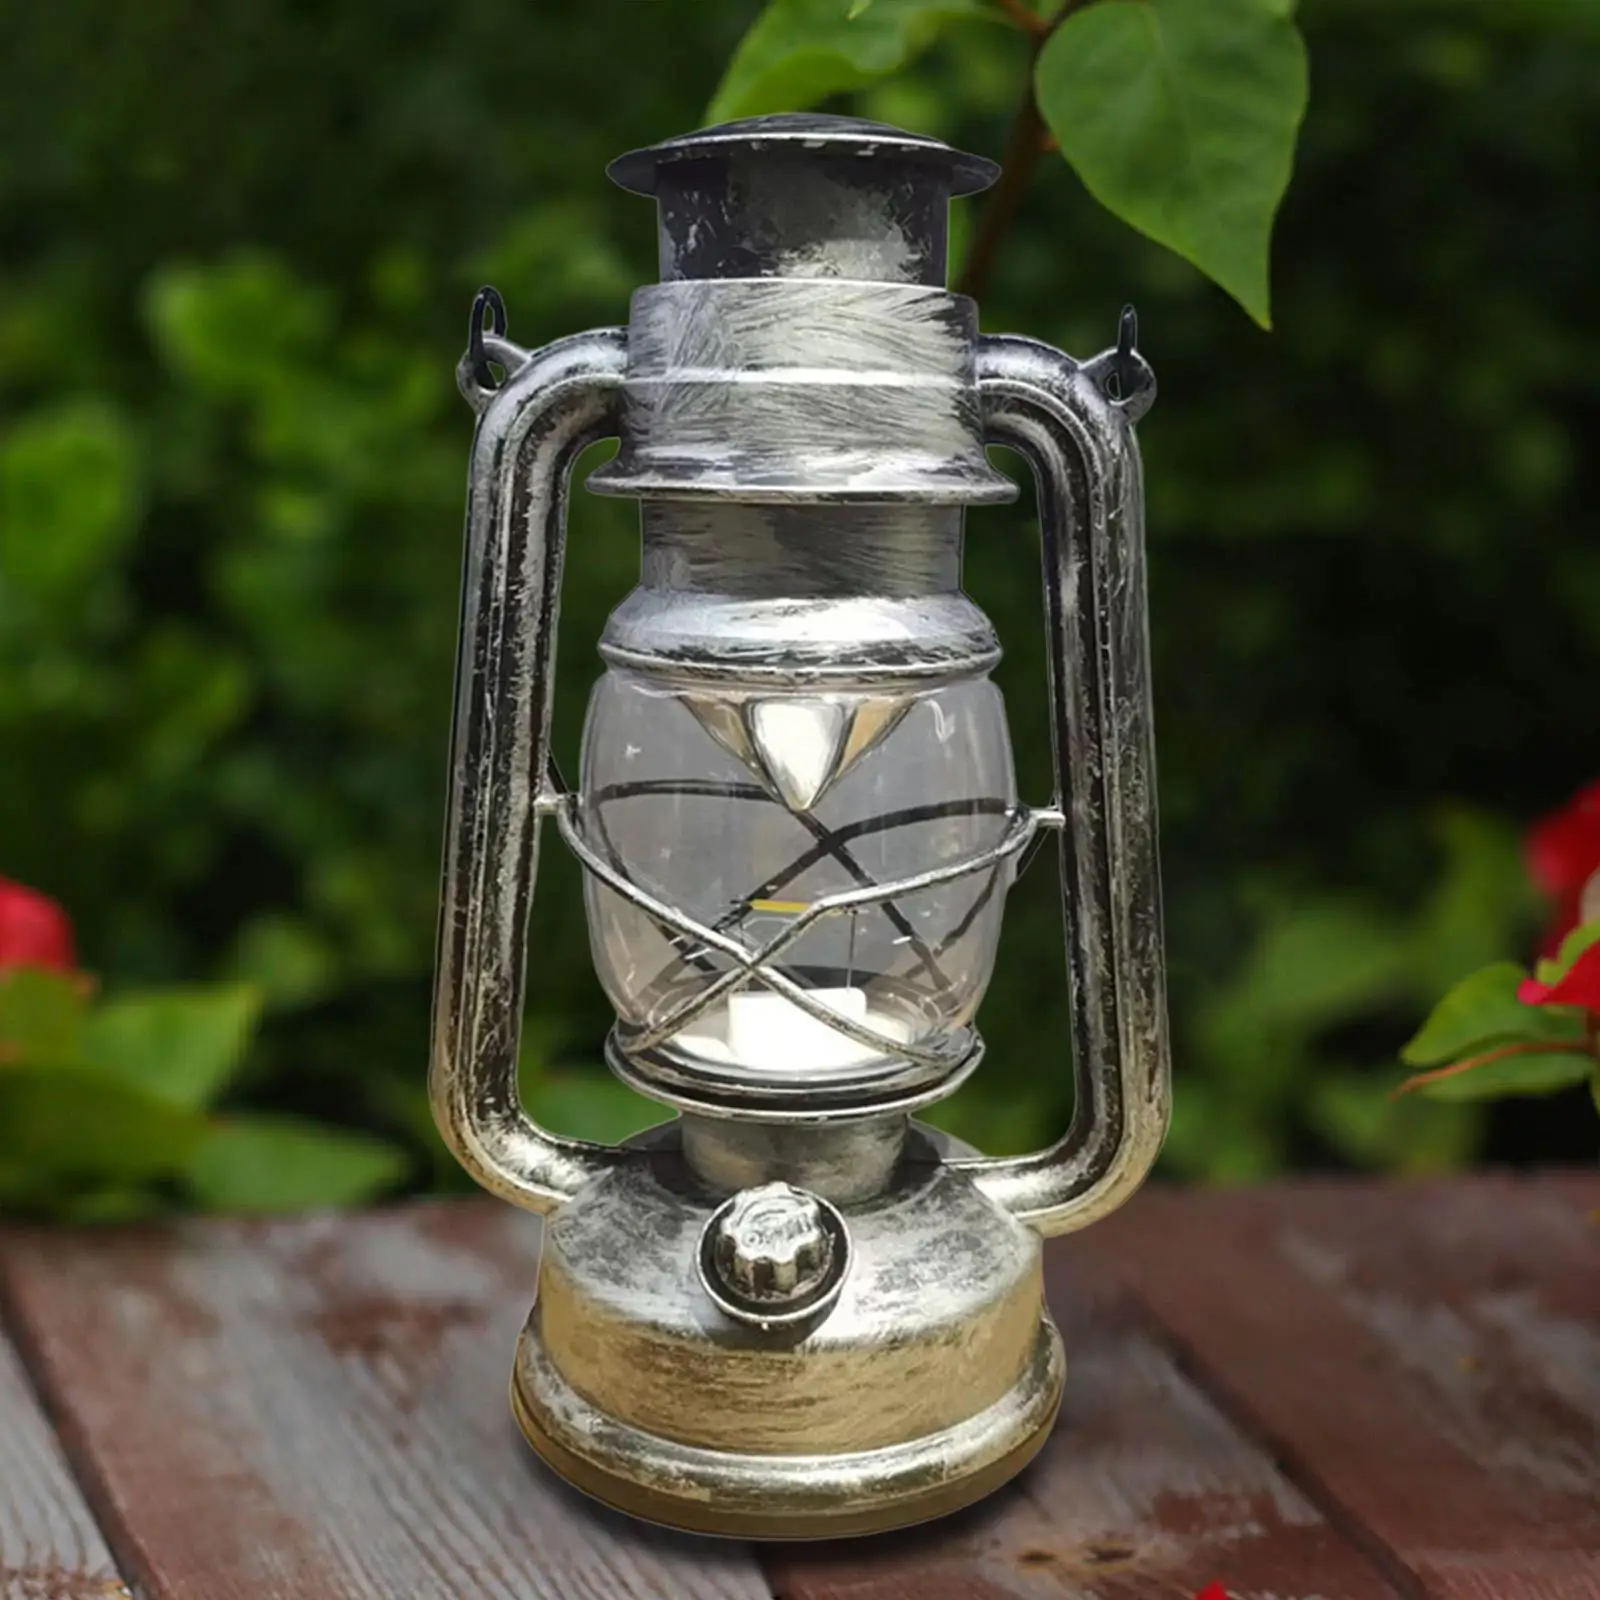 Oil Lamp Classic Outdoor Camping Light Oil Lantern Lamp for Farmhouse BBQ